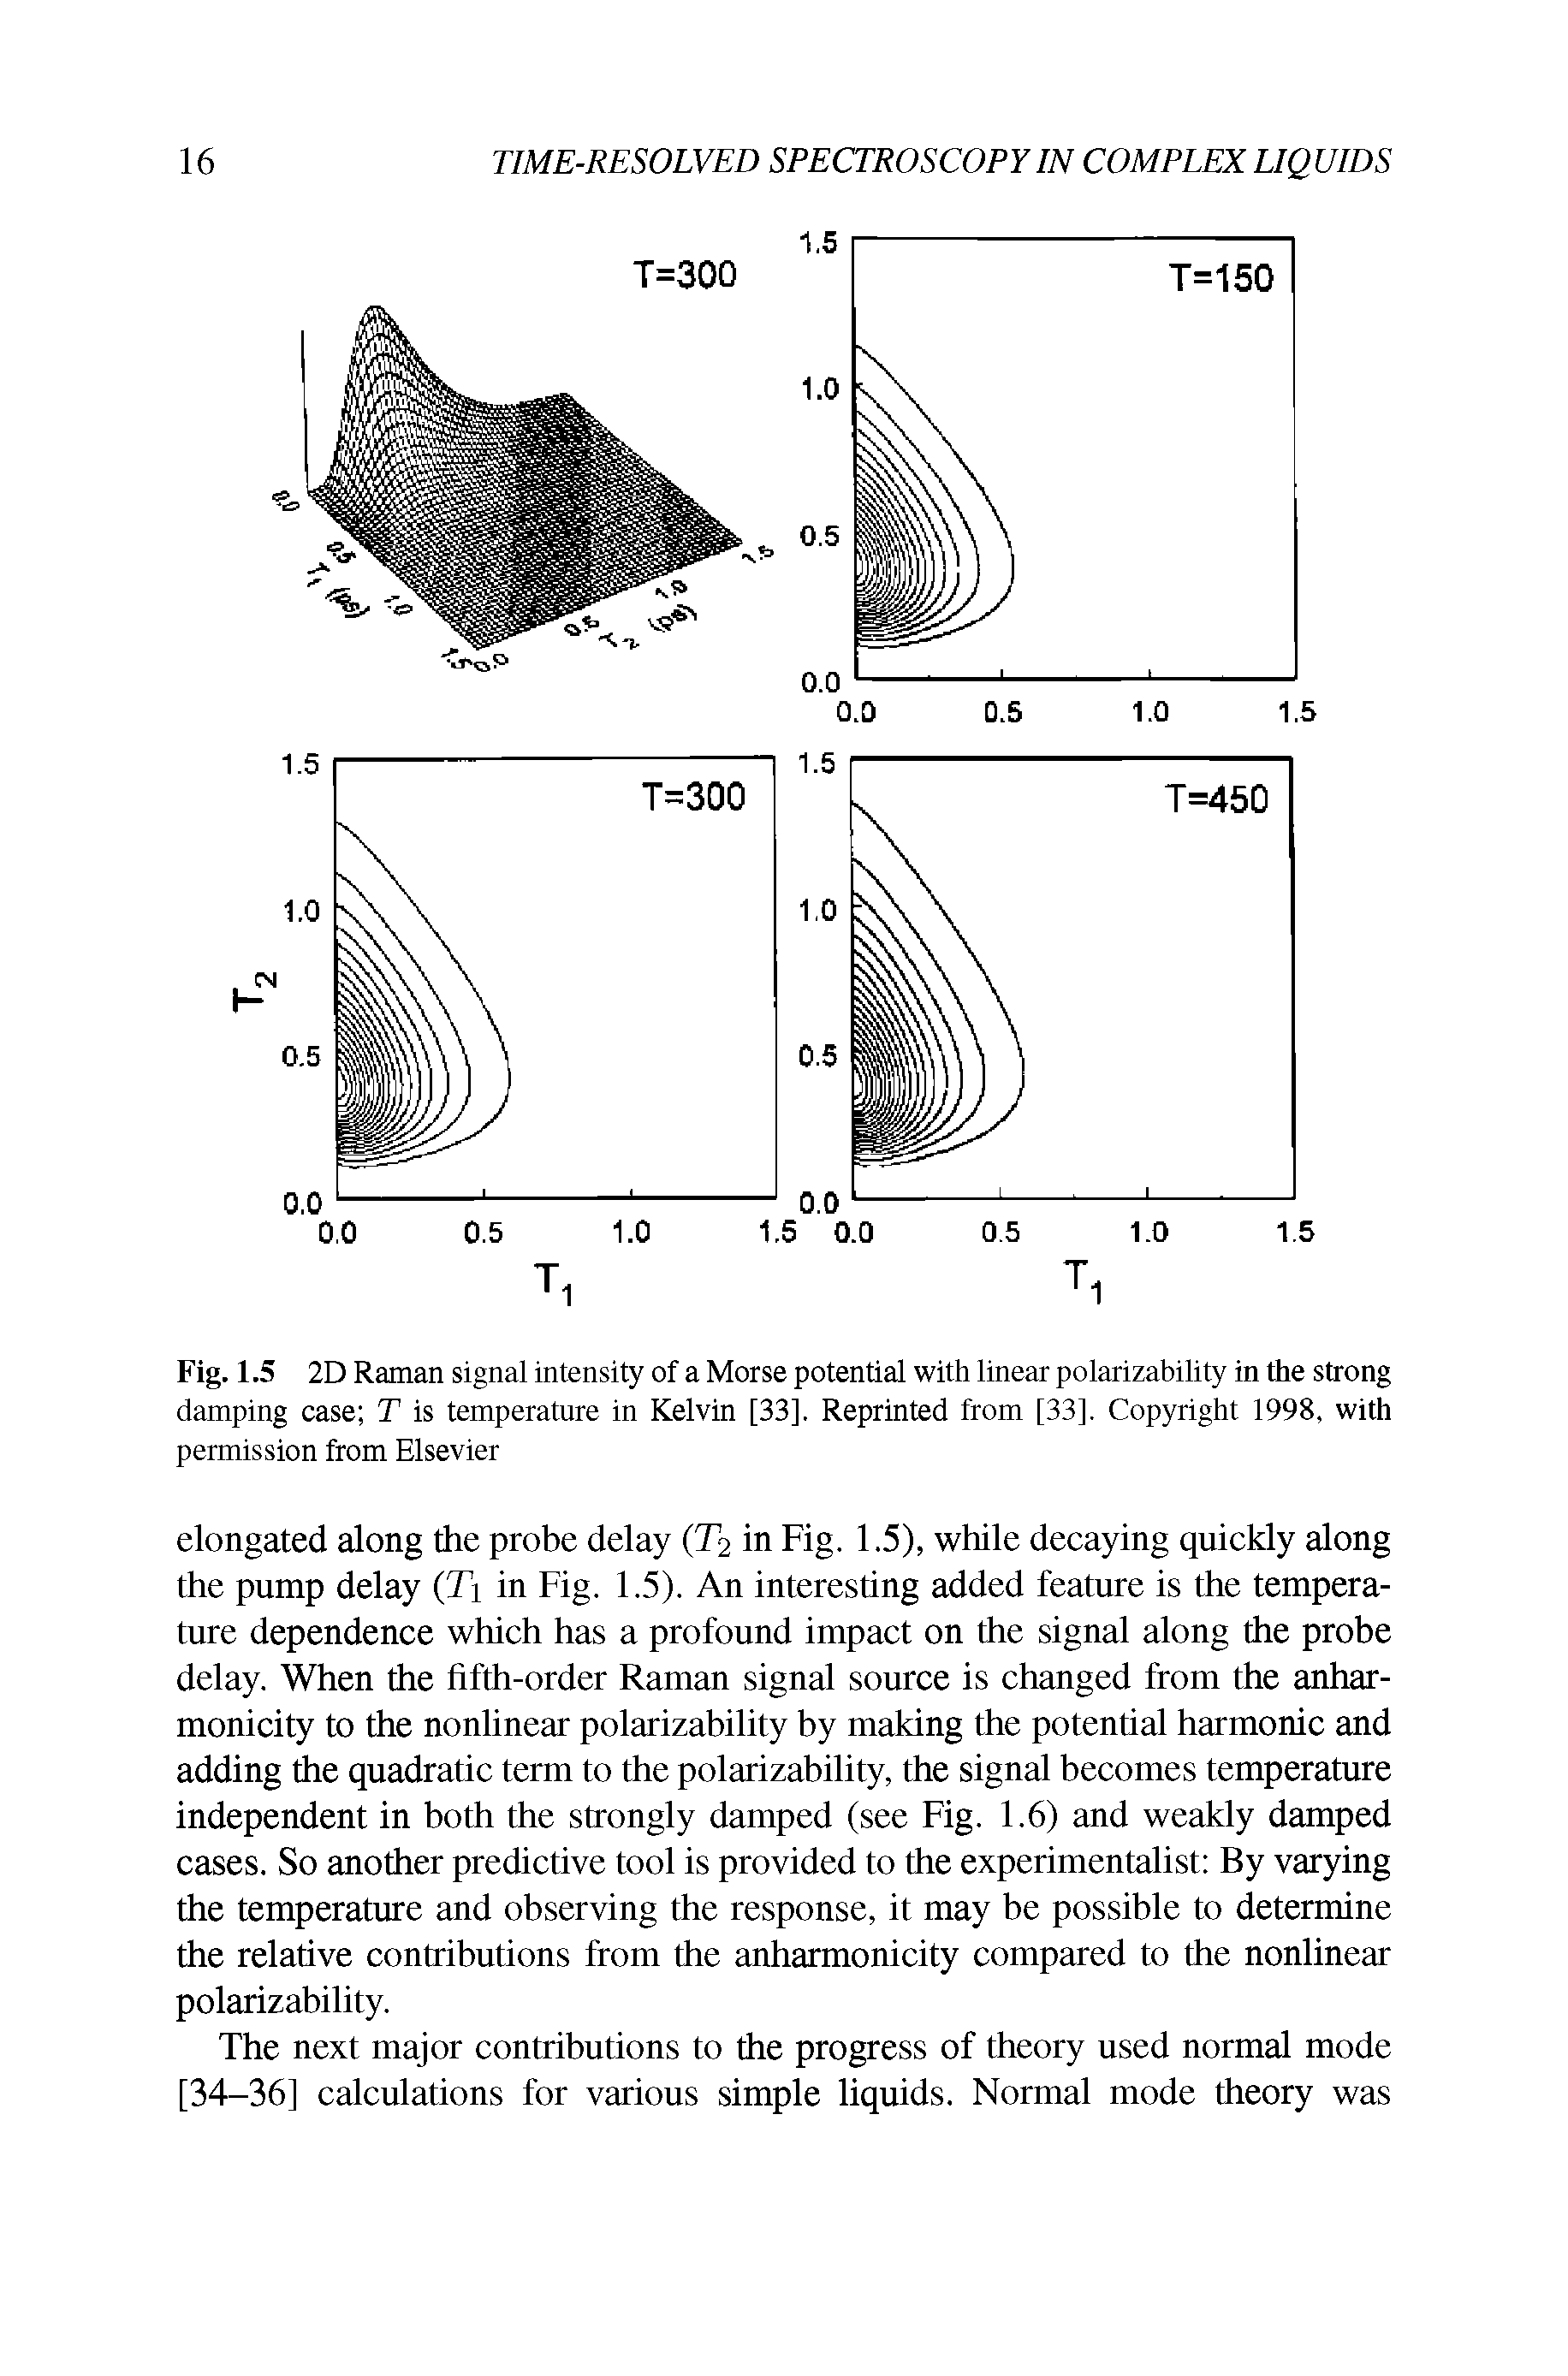 Fig. 1.5 2D Raman signal intensity of a Morse potential with linear polarizability in the strong damping case T is temperature in Kelvin [33], Reprinted from [33]. Copyright 1998, with permission from Elsevier...